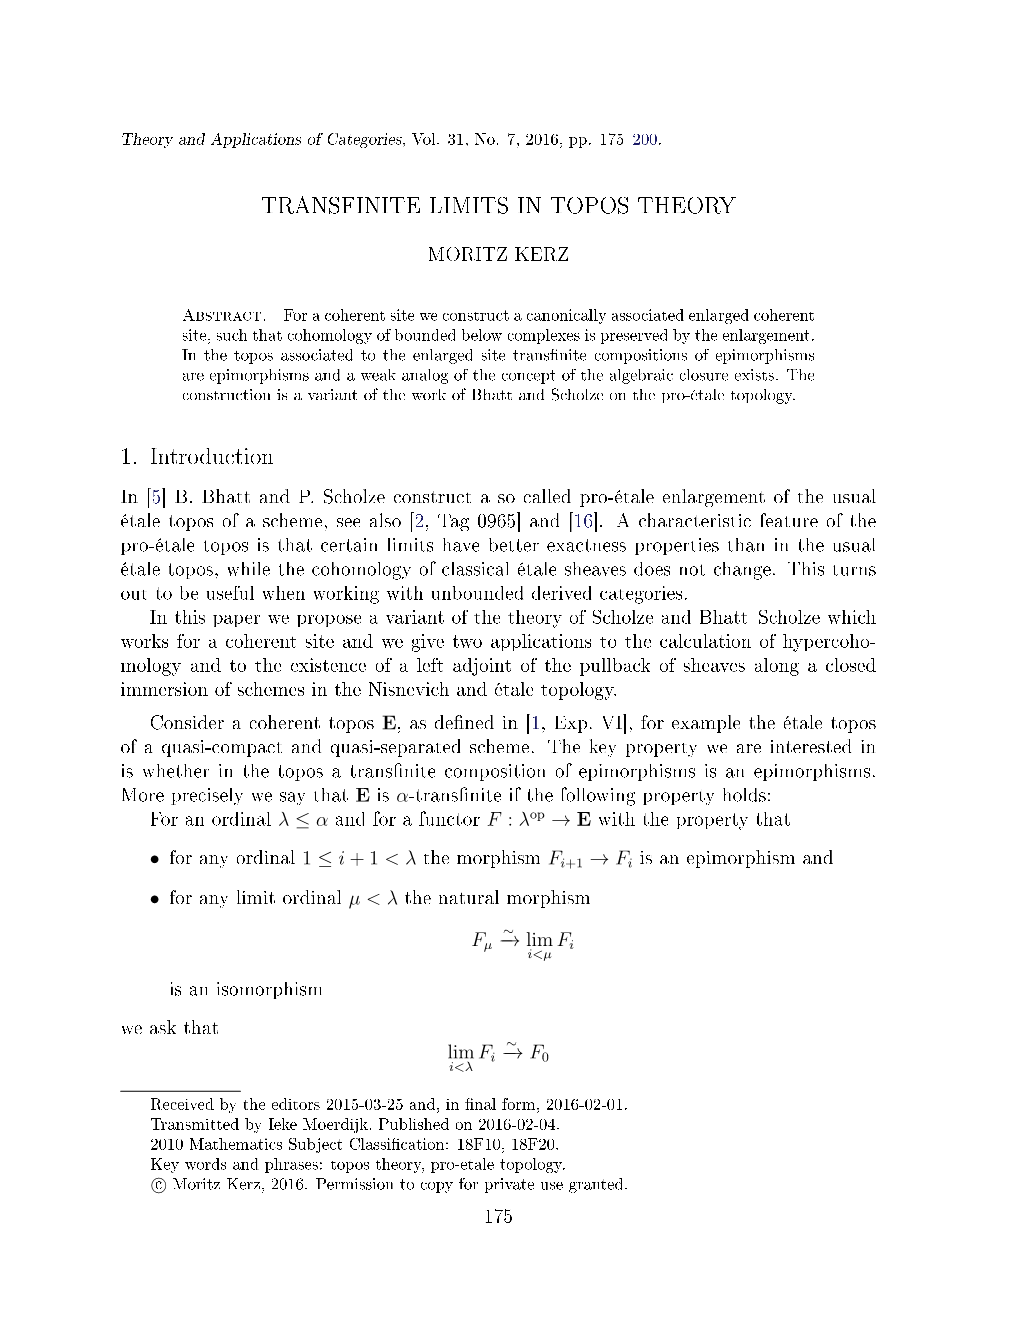 TRANSFINITE LIMITS in TOPOS THEORY 1. Introduction